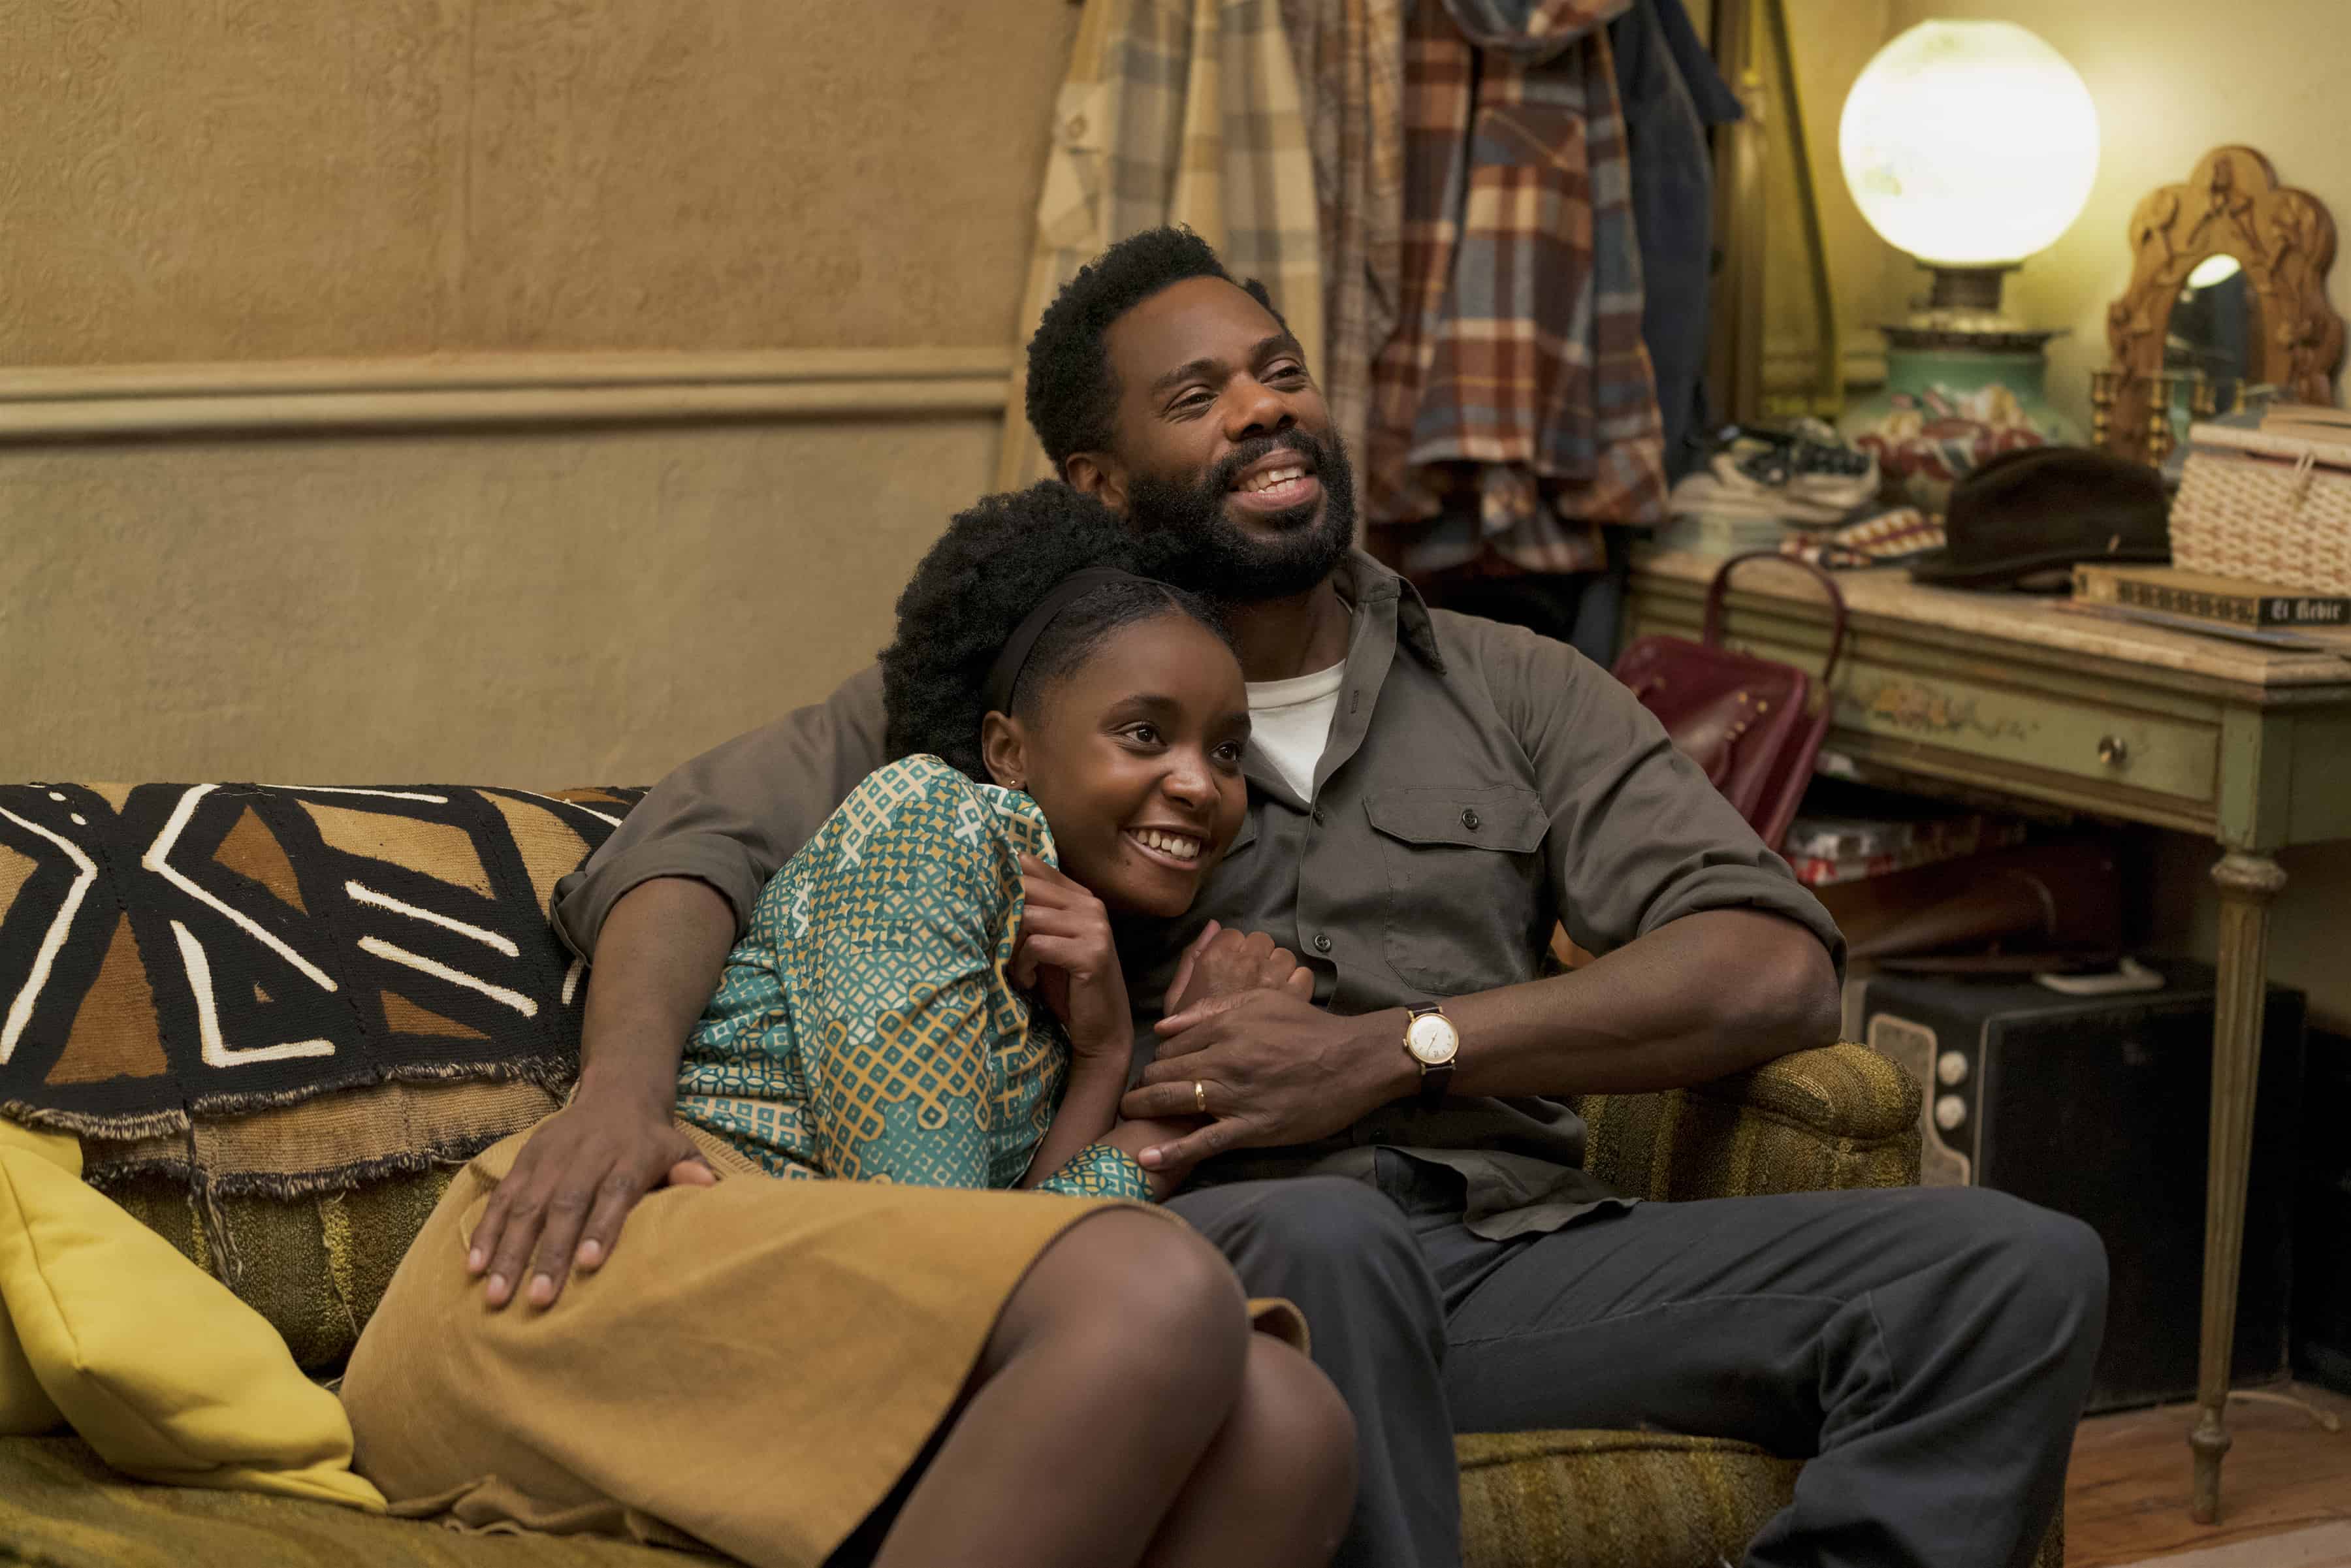 Religion & Love in “If Beale Street Could Talk”